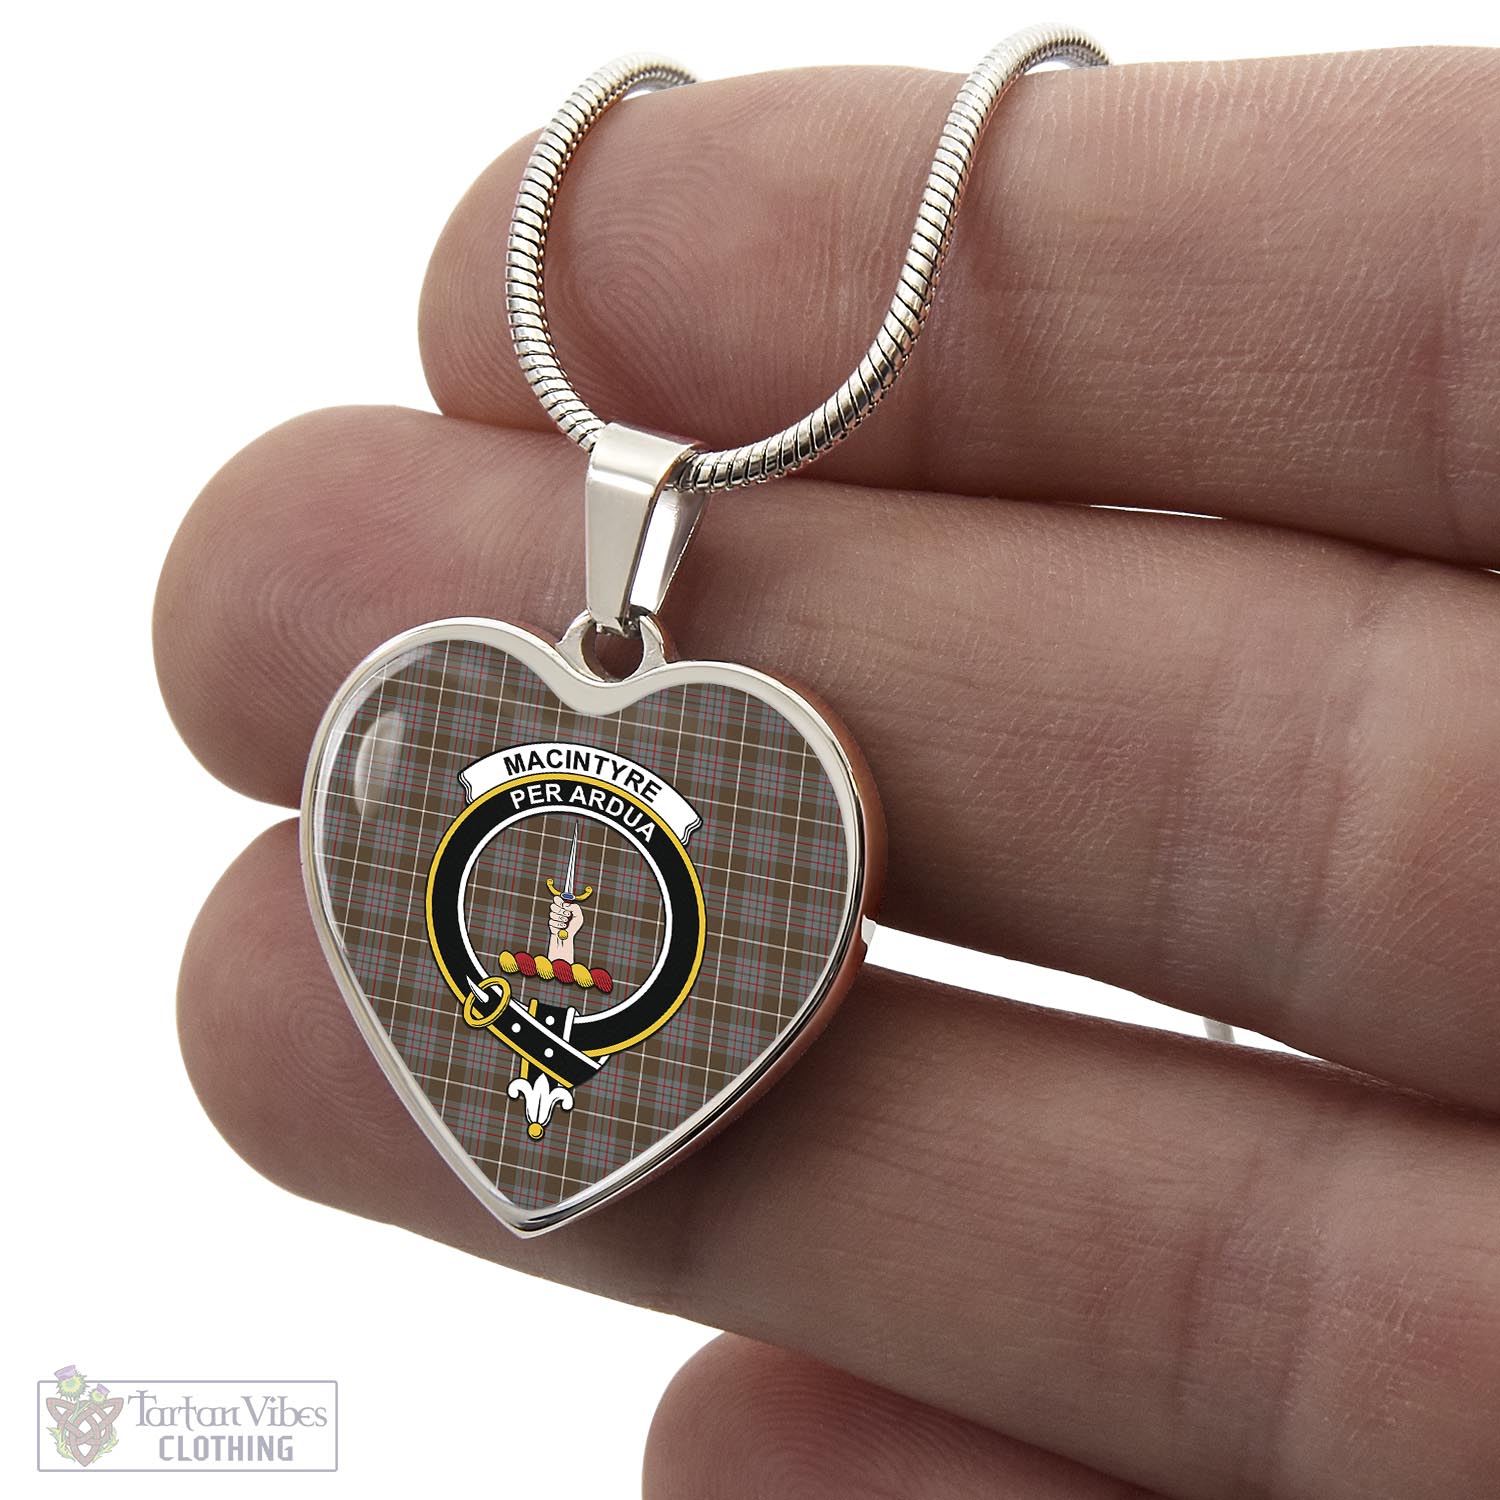 Tartan Vibes Clothing MacIntyre Hunting Weathered Tartan Heart Necklace with Family Crest